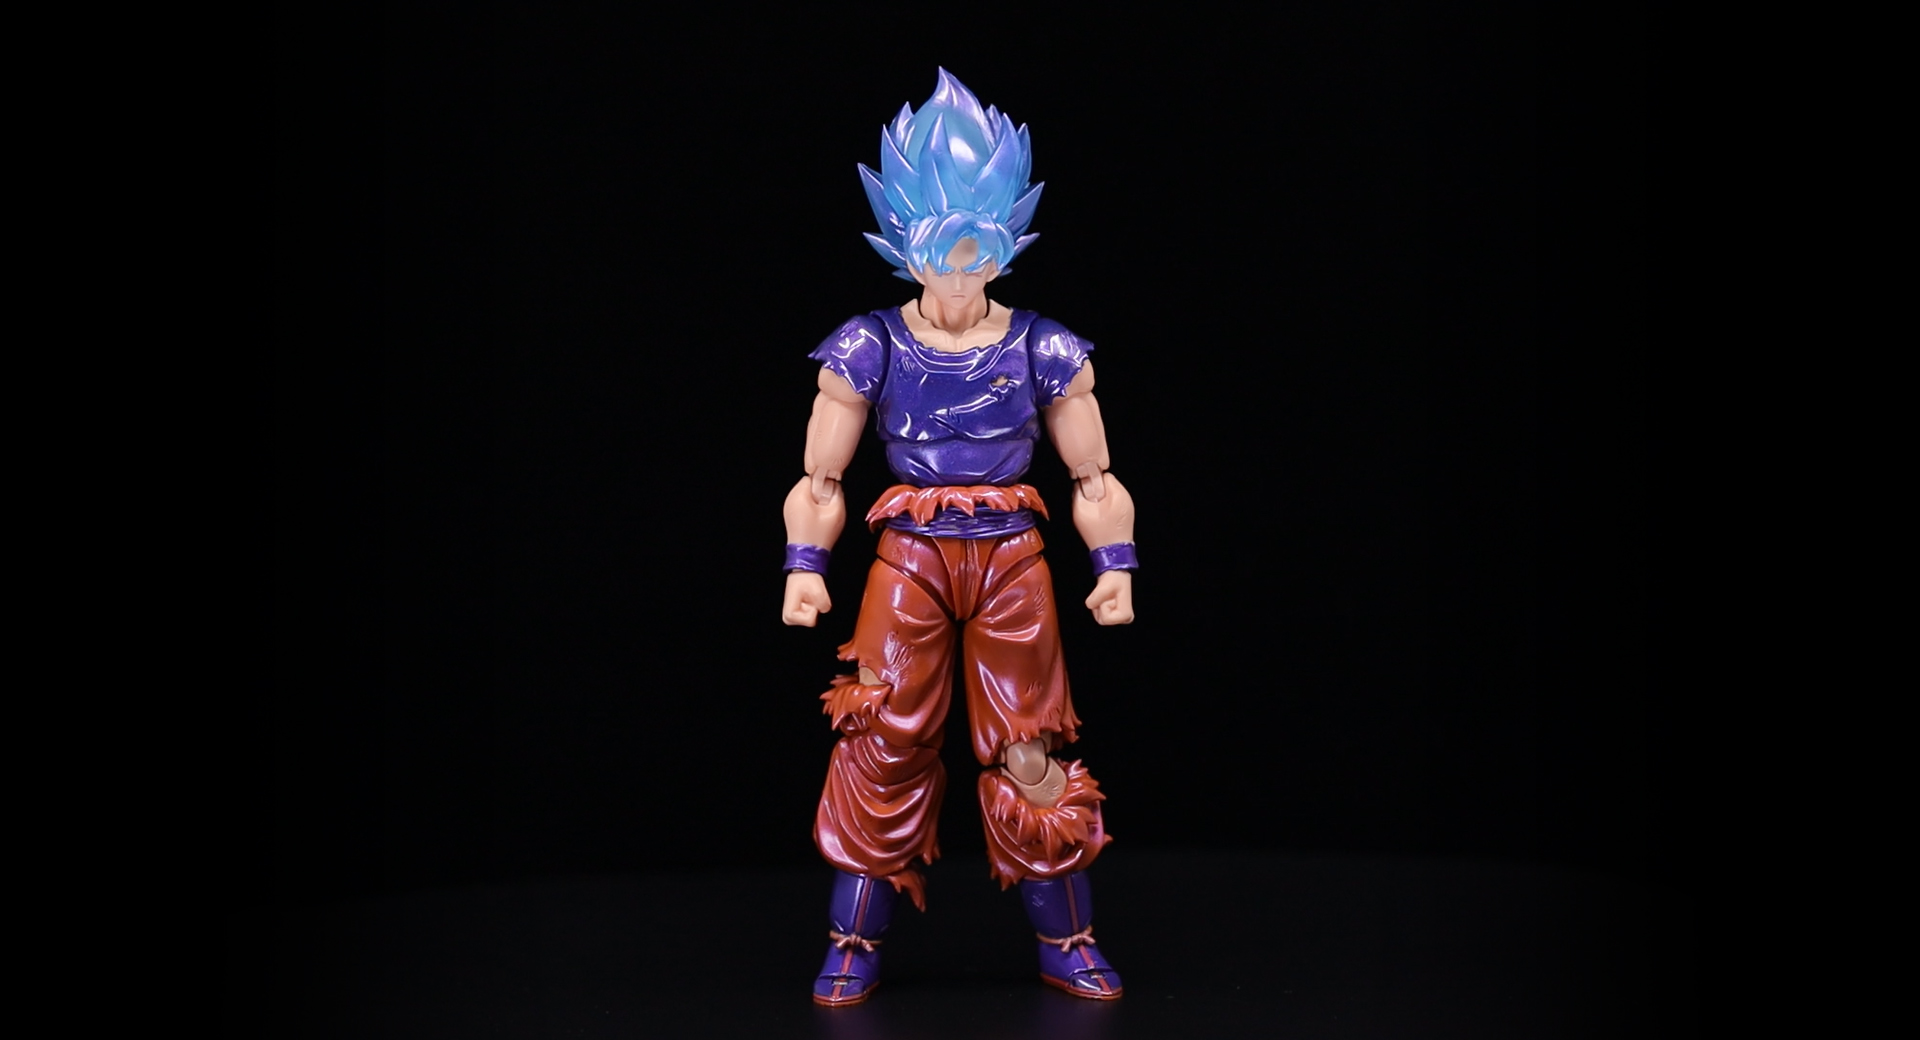 S.H.Figuarts スーパーサイヤ人ゴッド 孫悟空 界王拳 特別 Ver.Eatおもちゃ